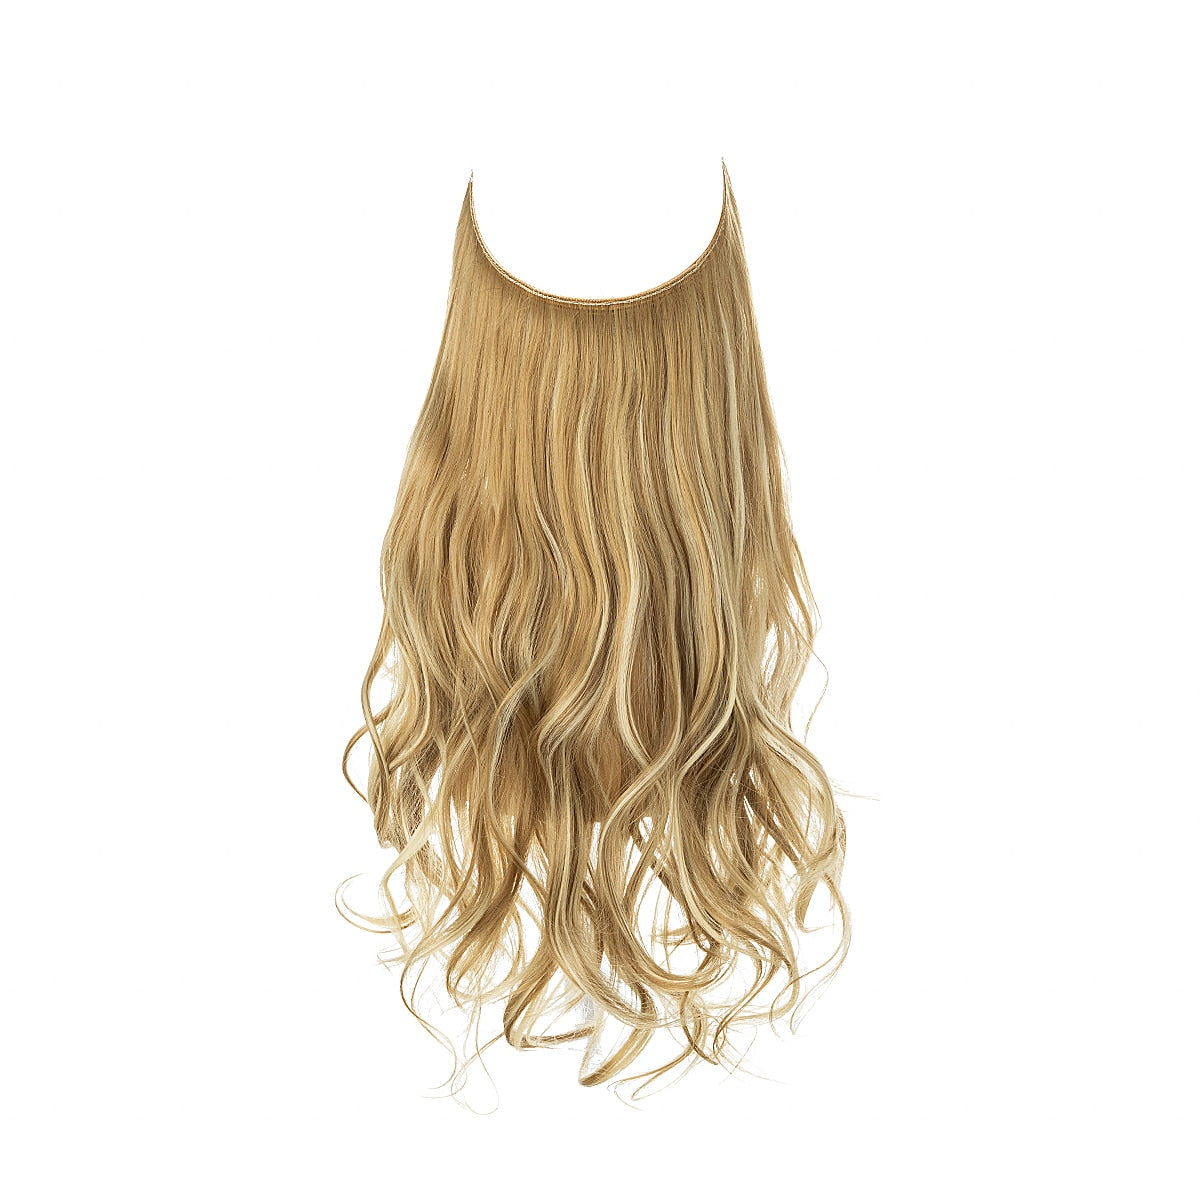 TEEK - Invisible Synth No Clip No Comb Wave Hair Extensions | Blonde Shades HAIR theteekdotcom 22H613 14inches 20-22 days